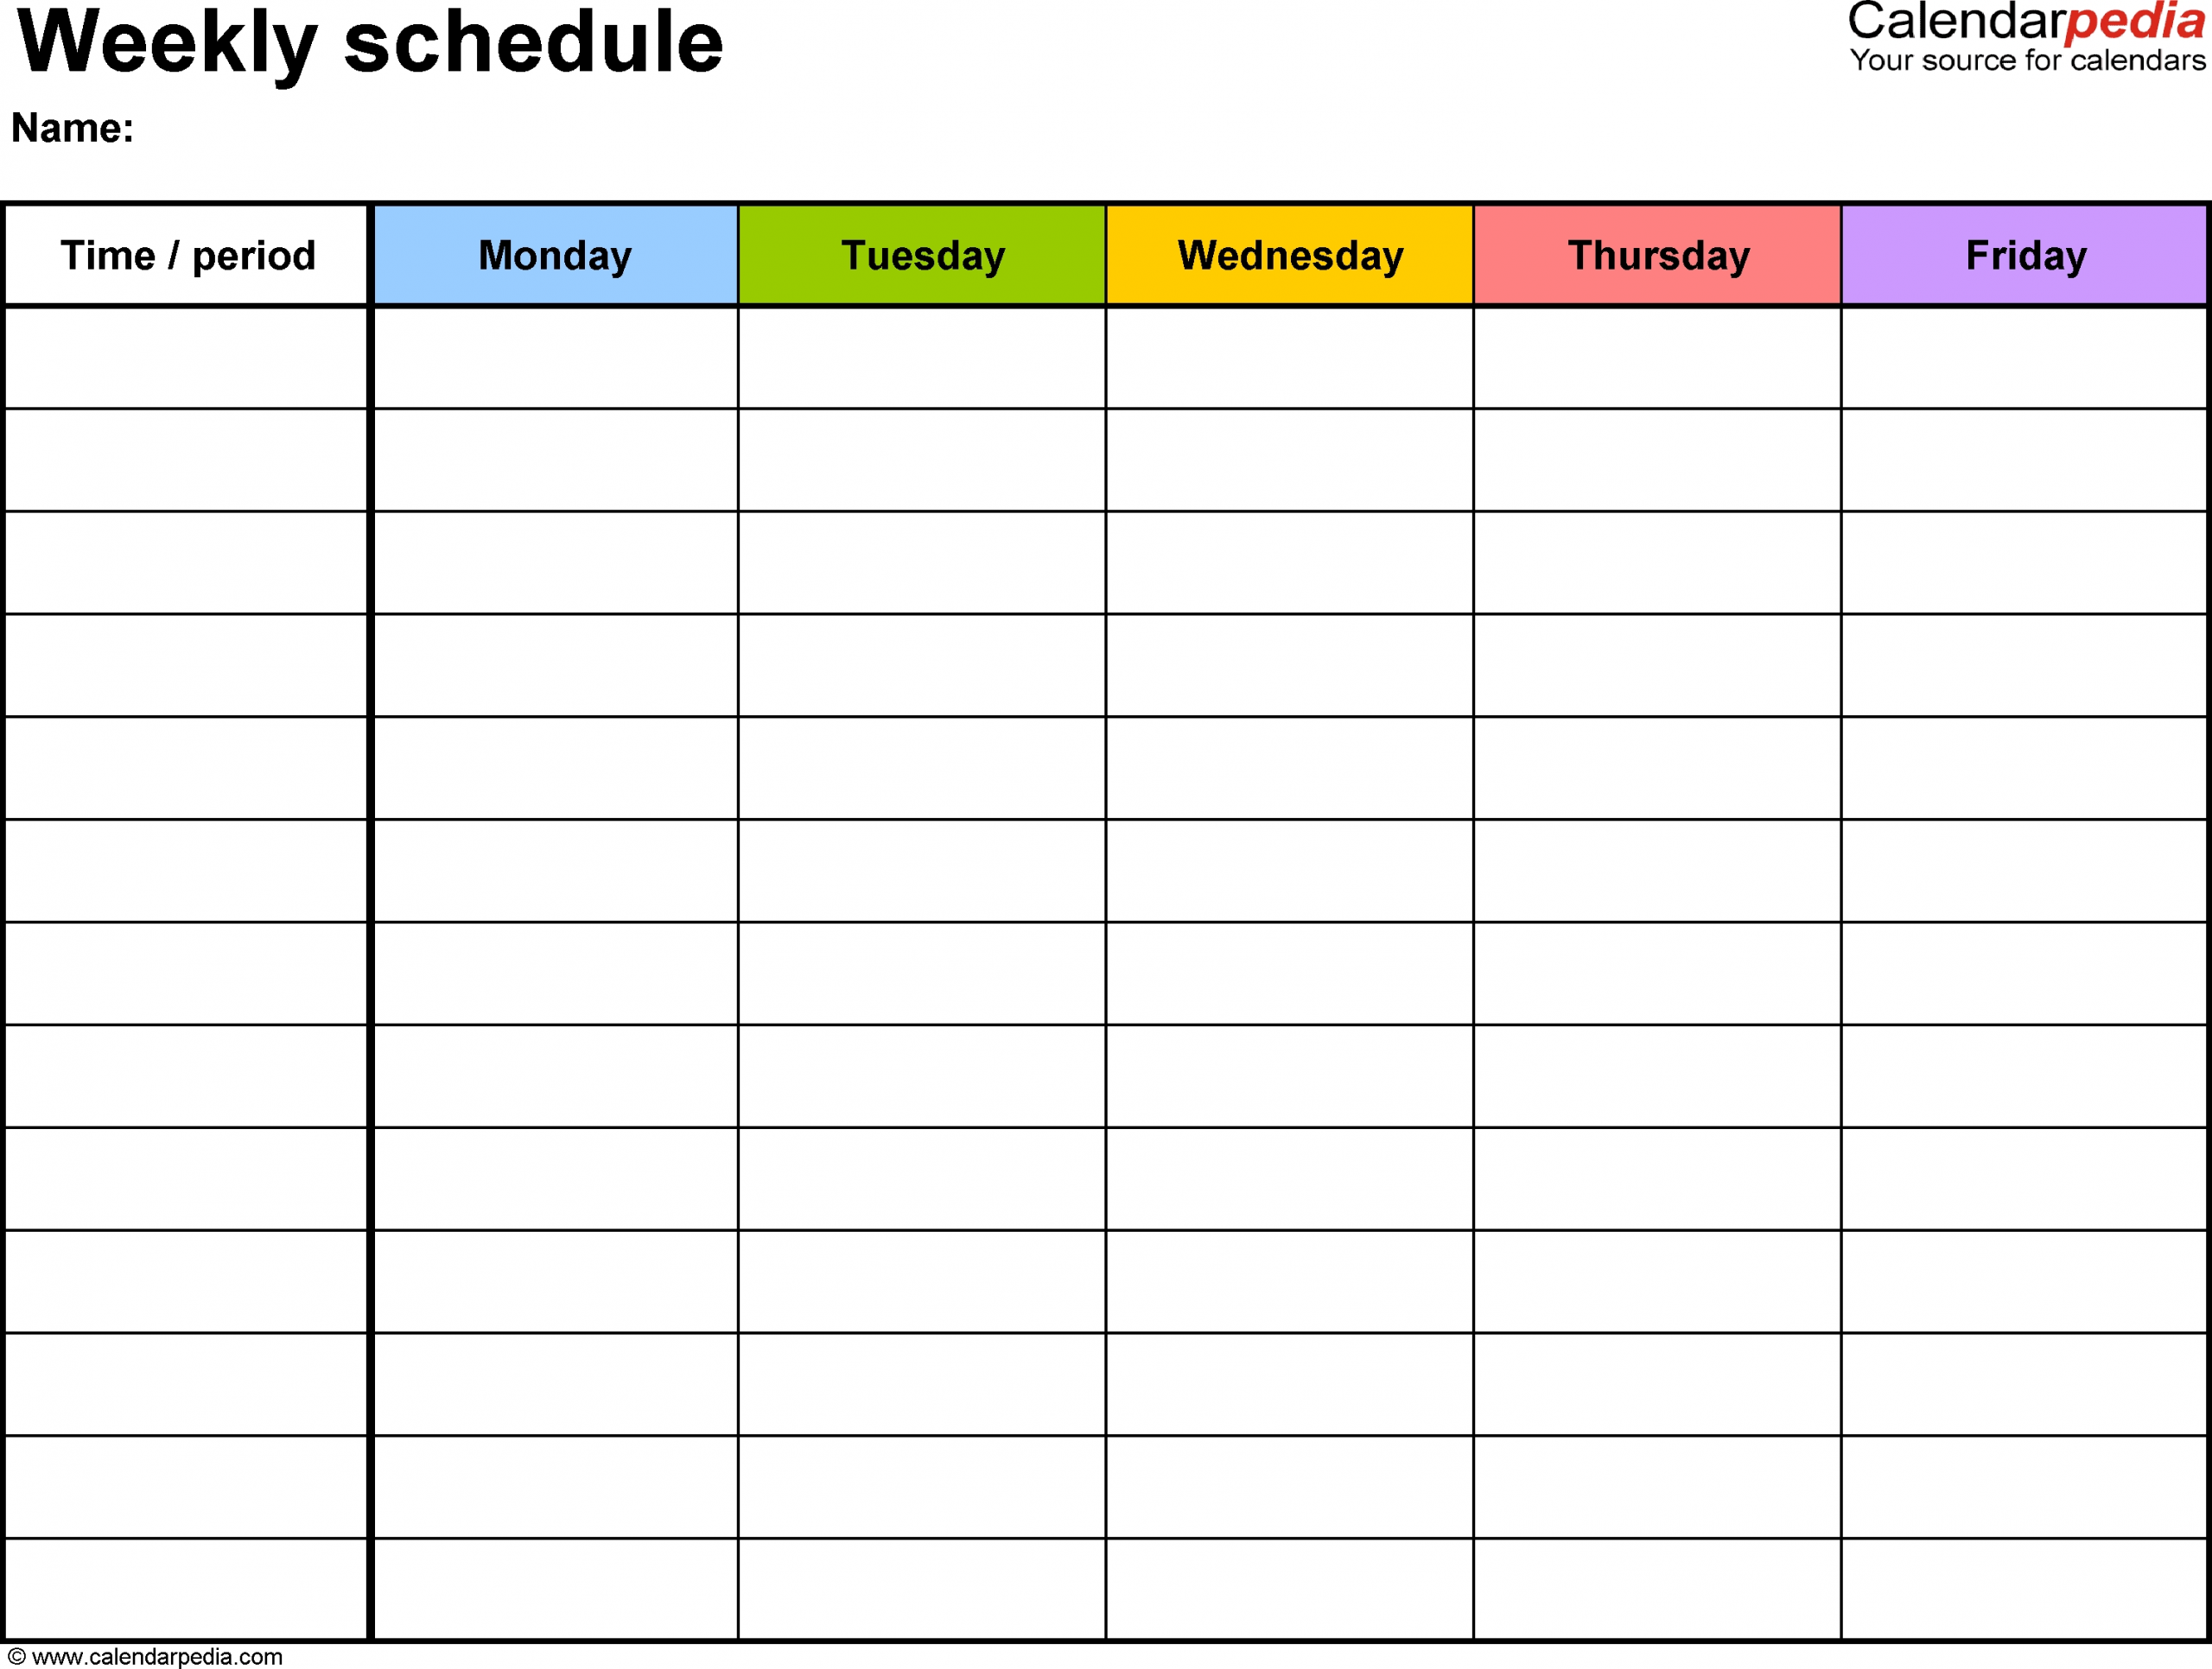 Weekly Schedule Template For Word Version 1: Landscape, 1 Monday Through Friday Word Calendar